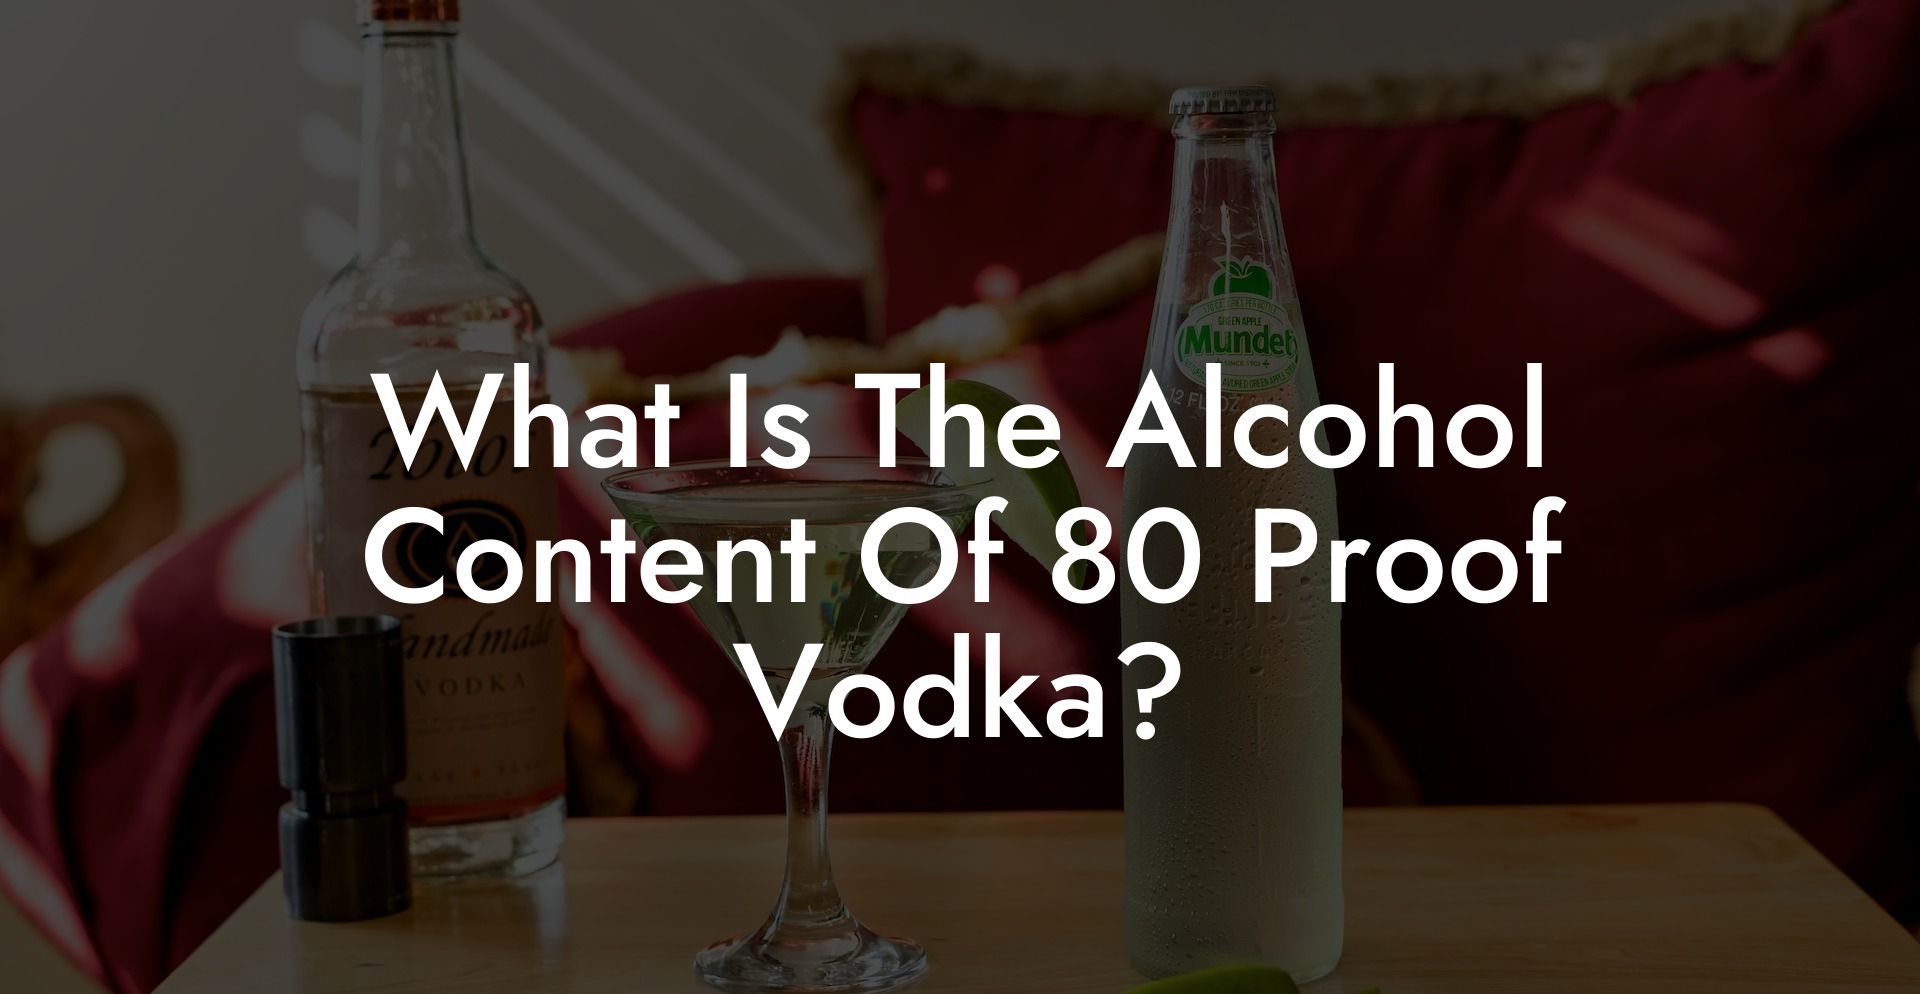 What Is The Alcohol Content Of 80 Proof Vodka?